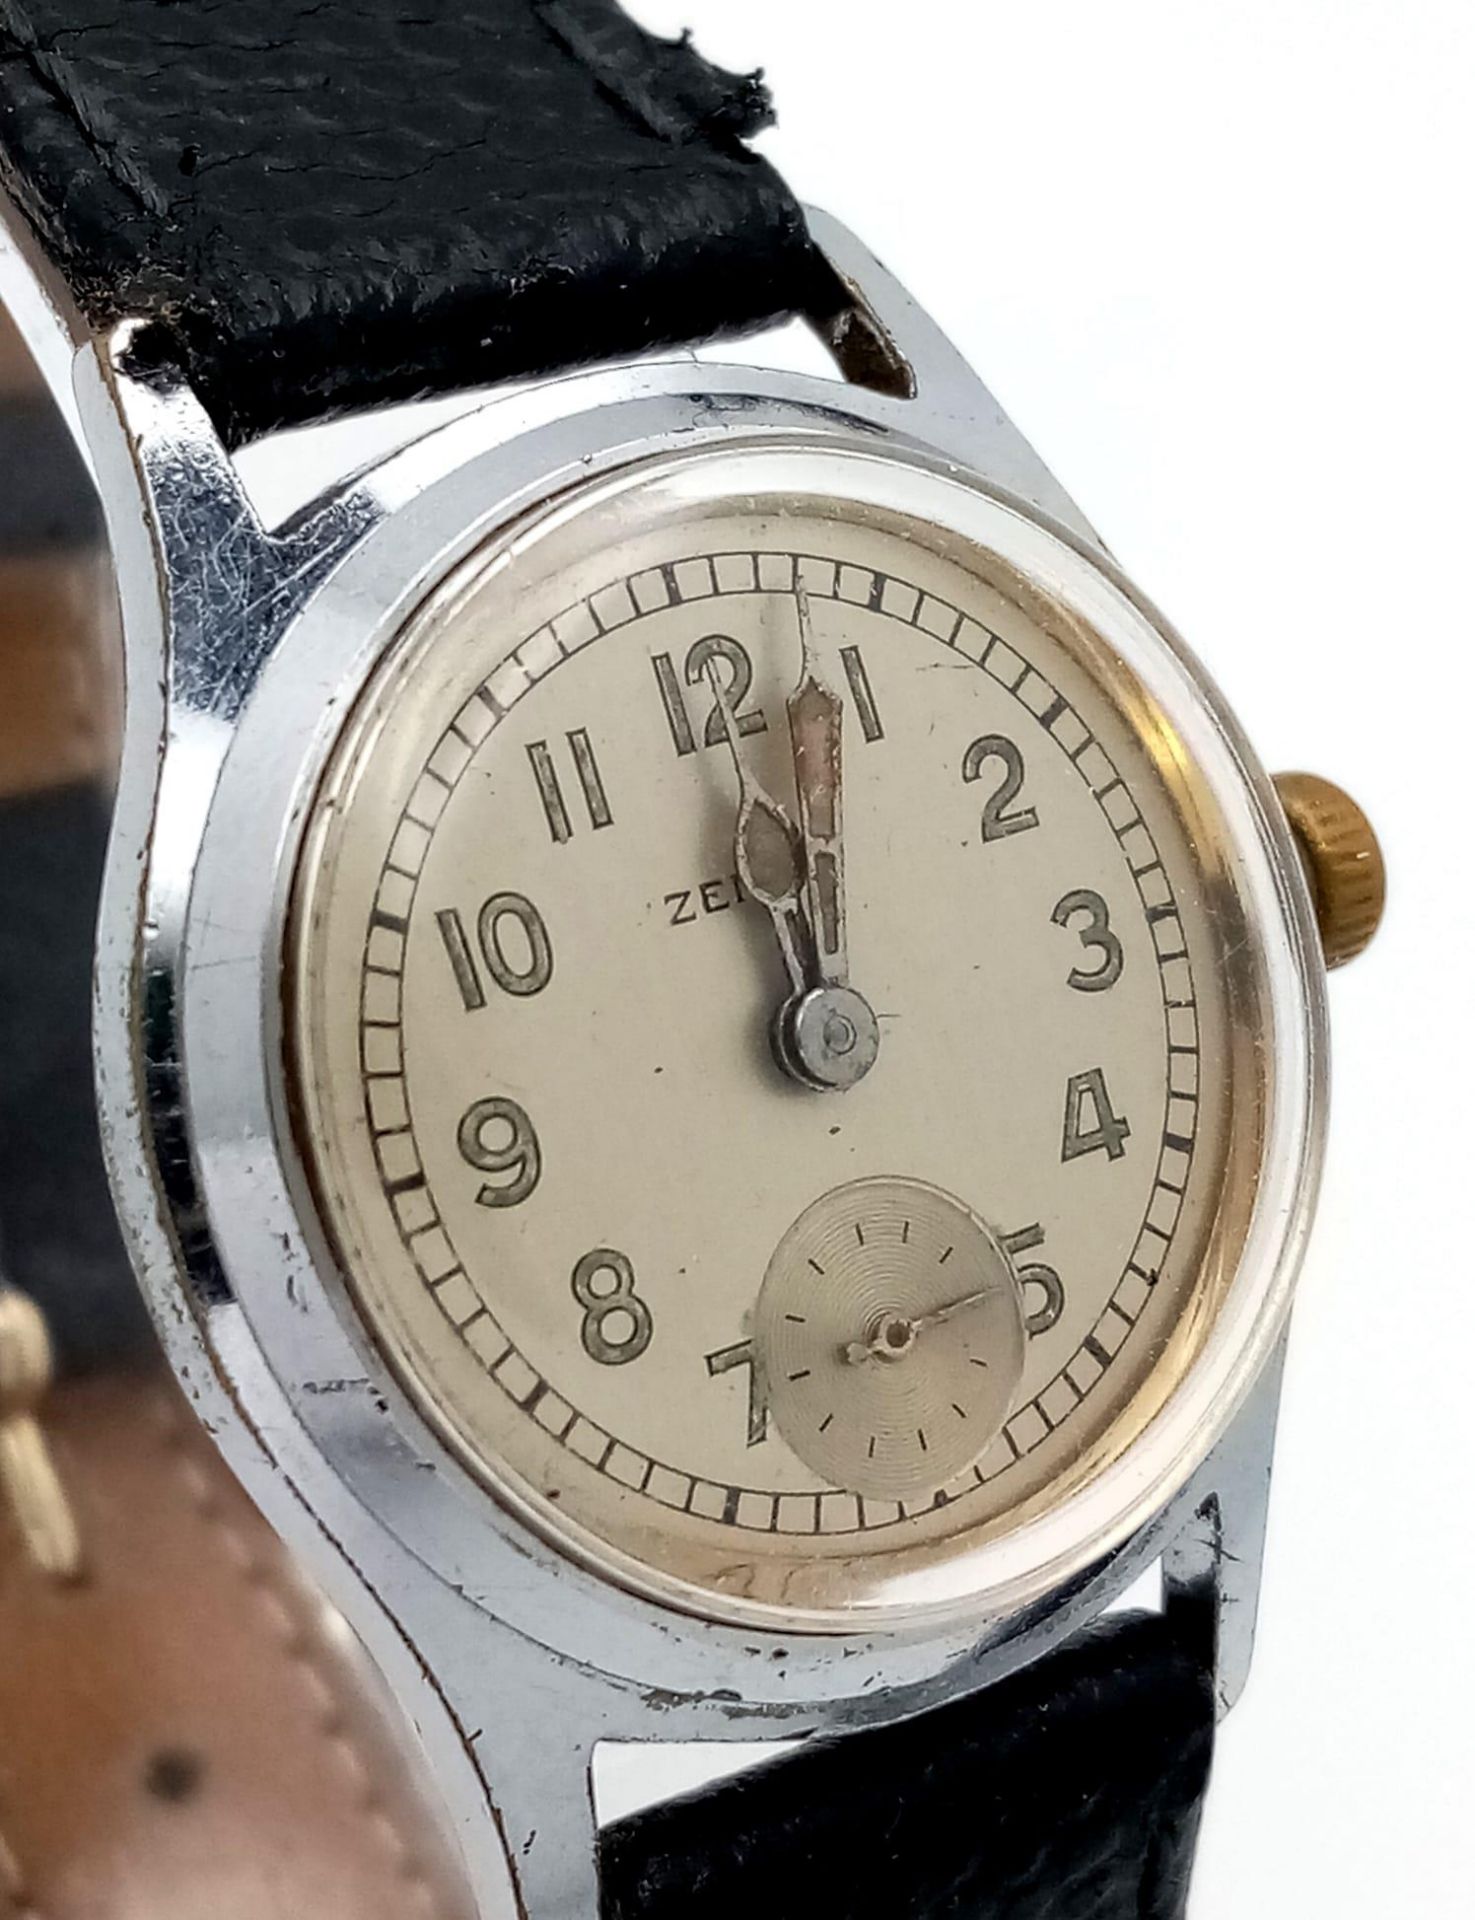 A Vintage Zenith Ladies Watch. Brown leather strap. Stainless steel case - 28mm. Silver tone dial - Image 4 of 8